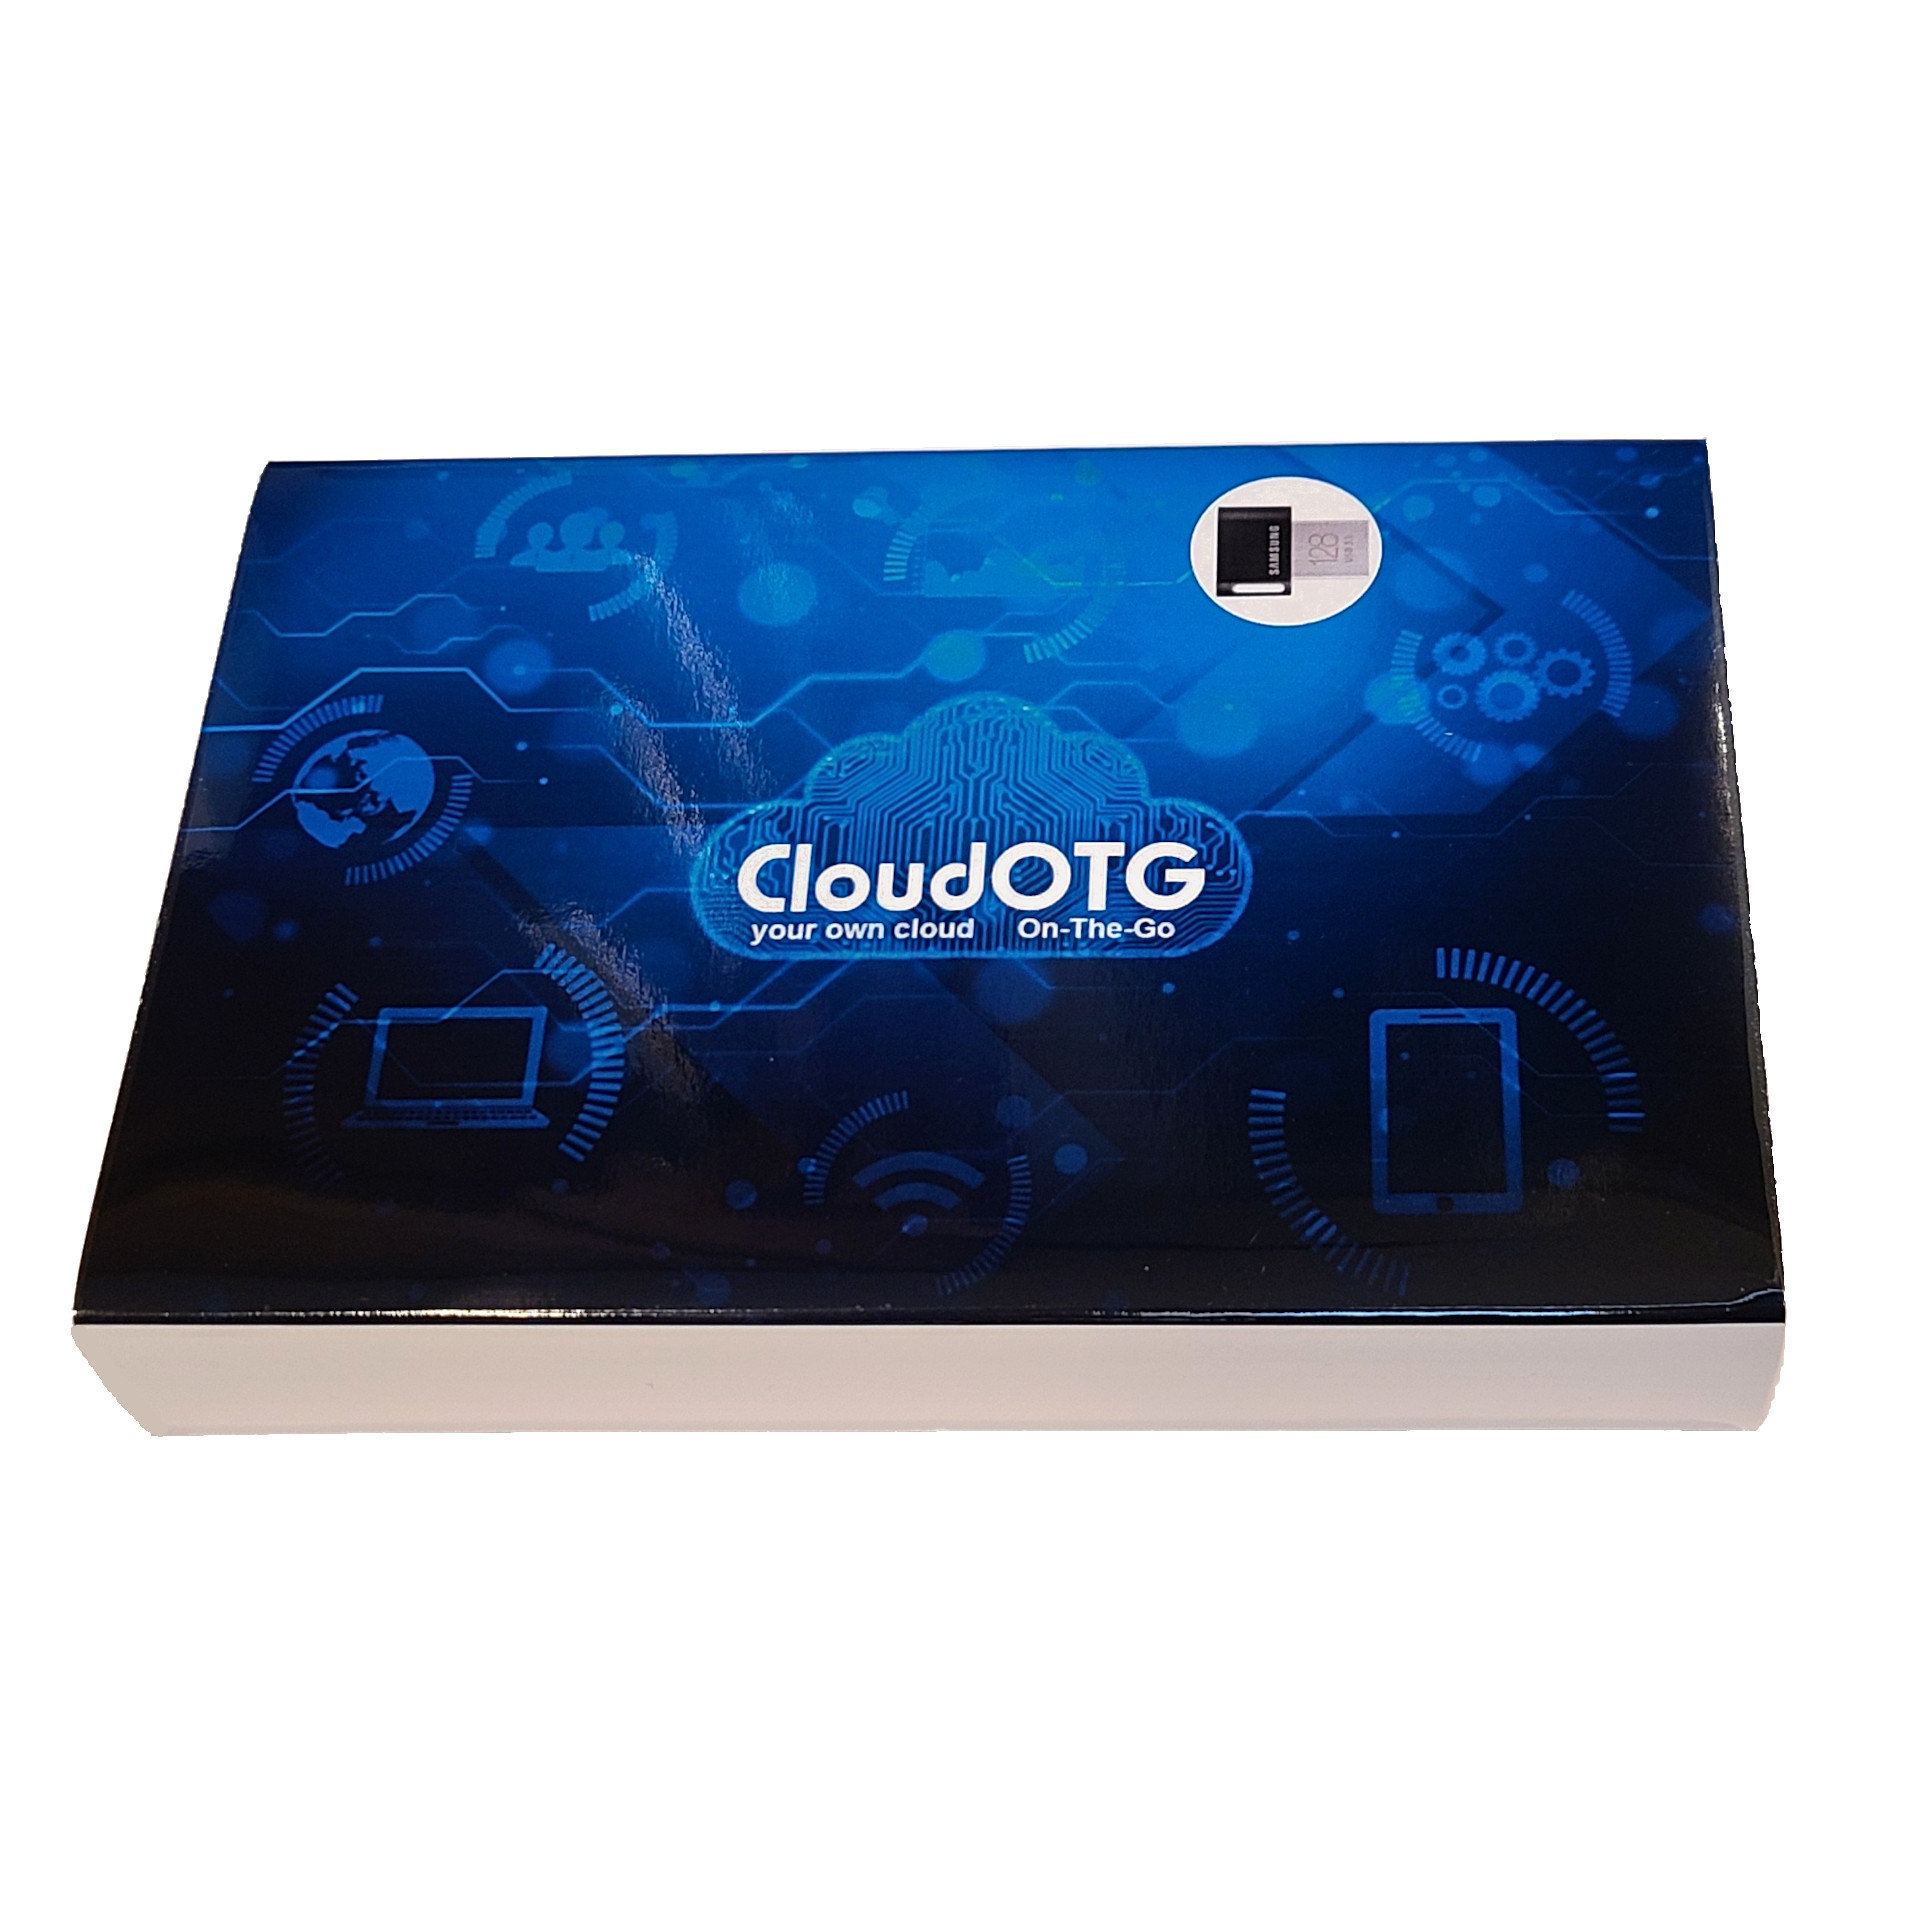 CloudOTG – your own cloud On-The-Go